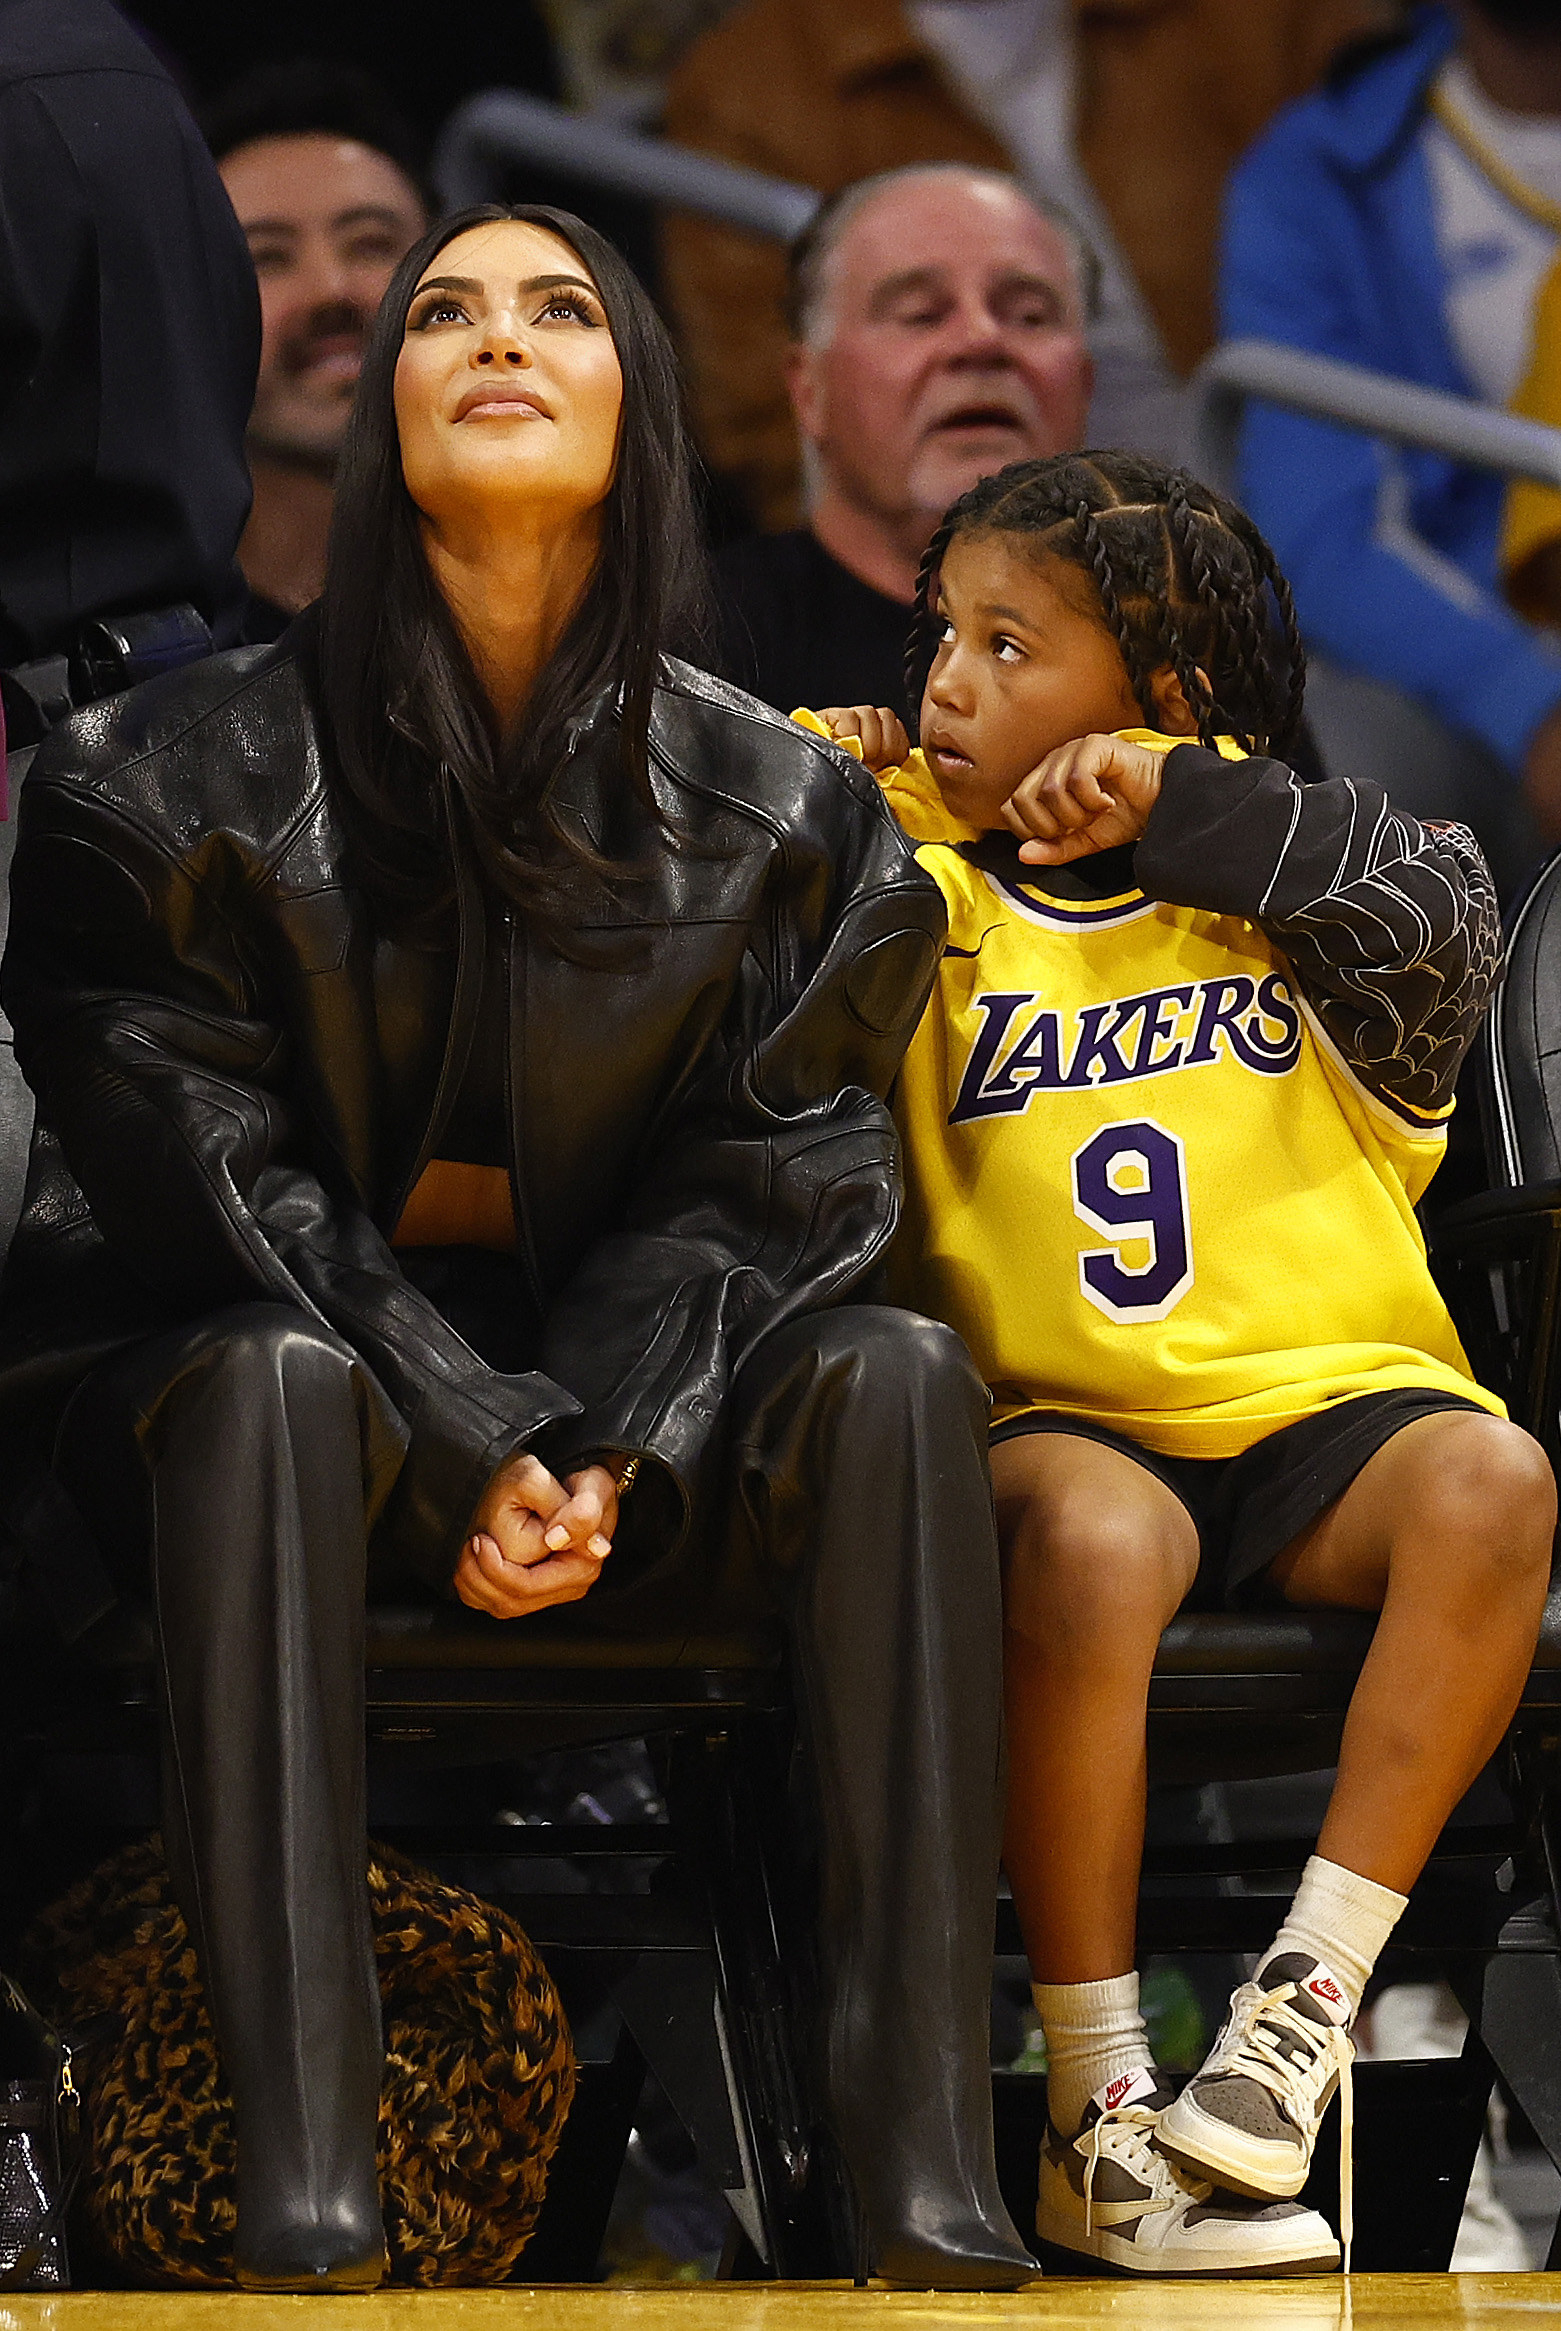 Kim sitting at a basketball game with Saint, who&#x27;s wearing a Lakers jersey